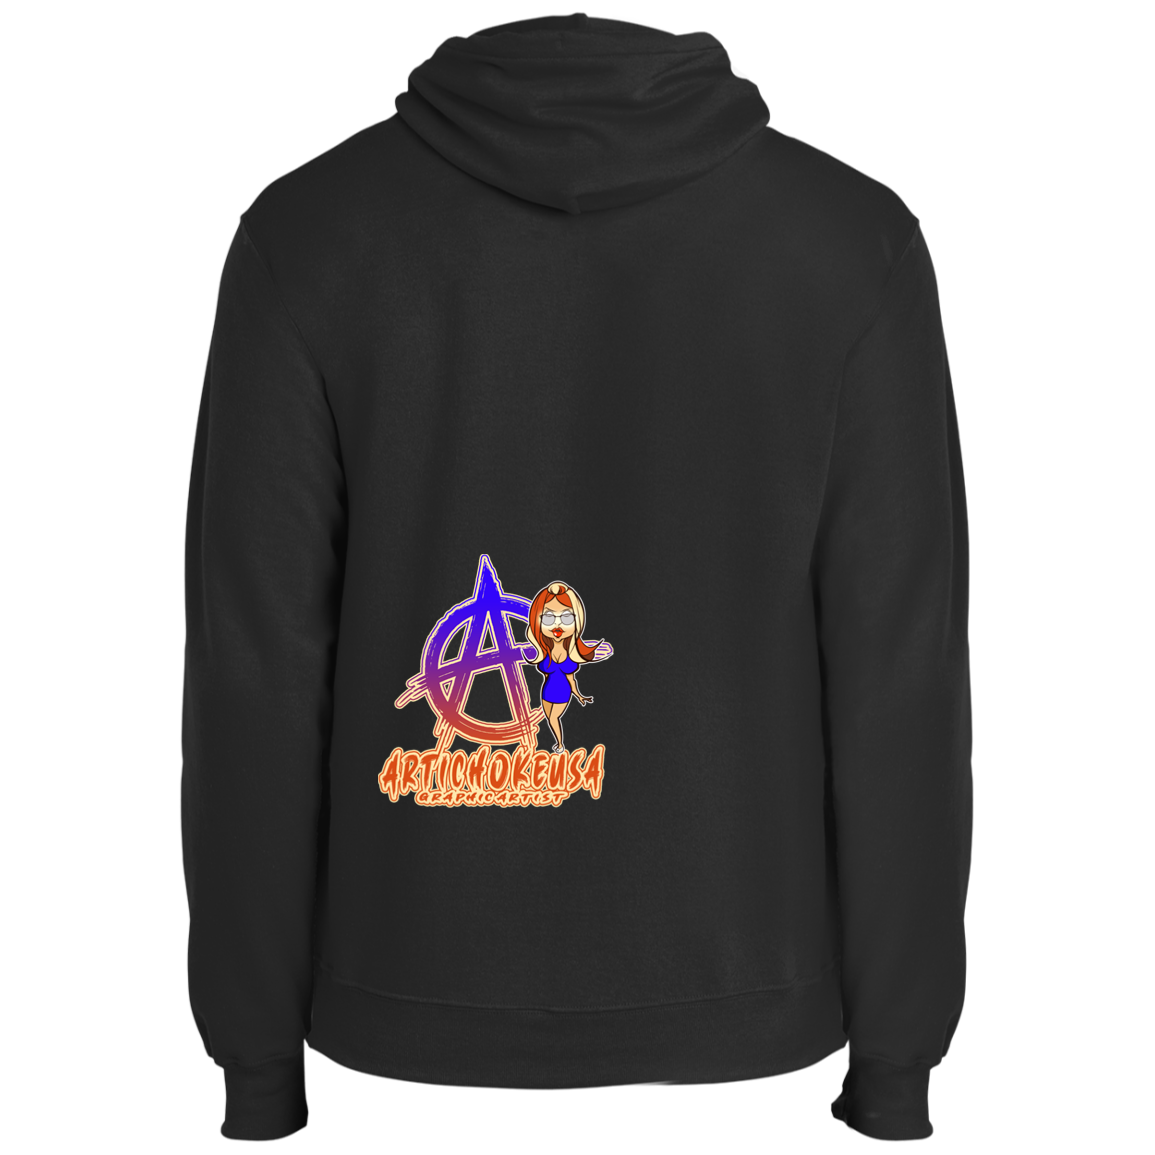 ArtichokeUSA Character and Font Design. Let’s Create Your Own Design Today. Blue Girl. Fleece Pullover Hoodie